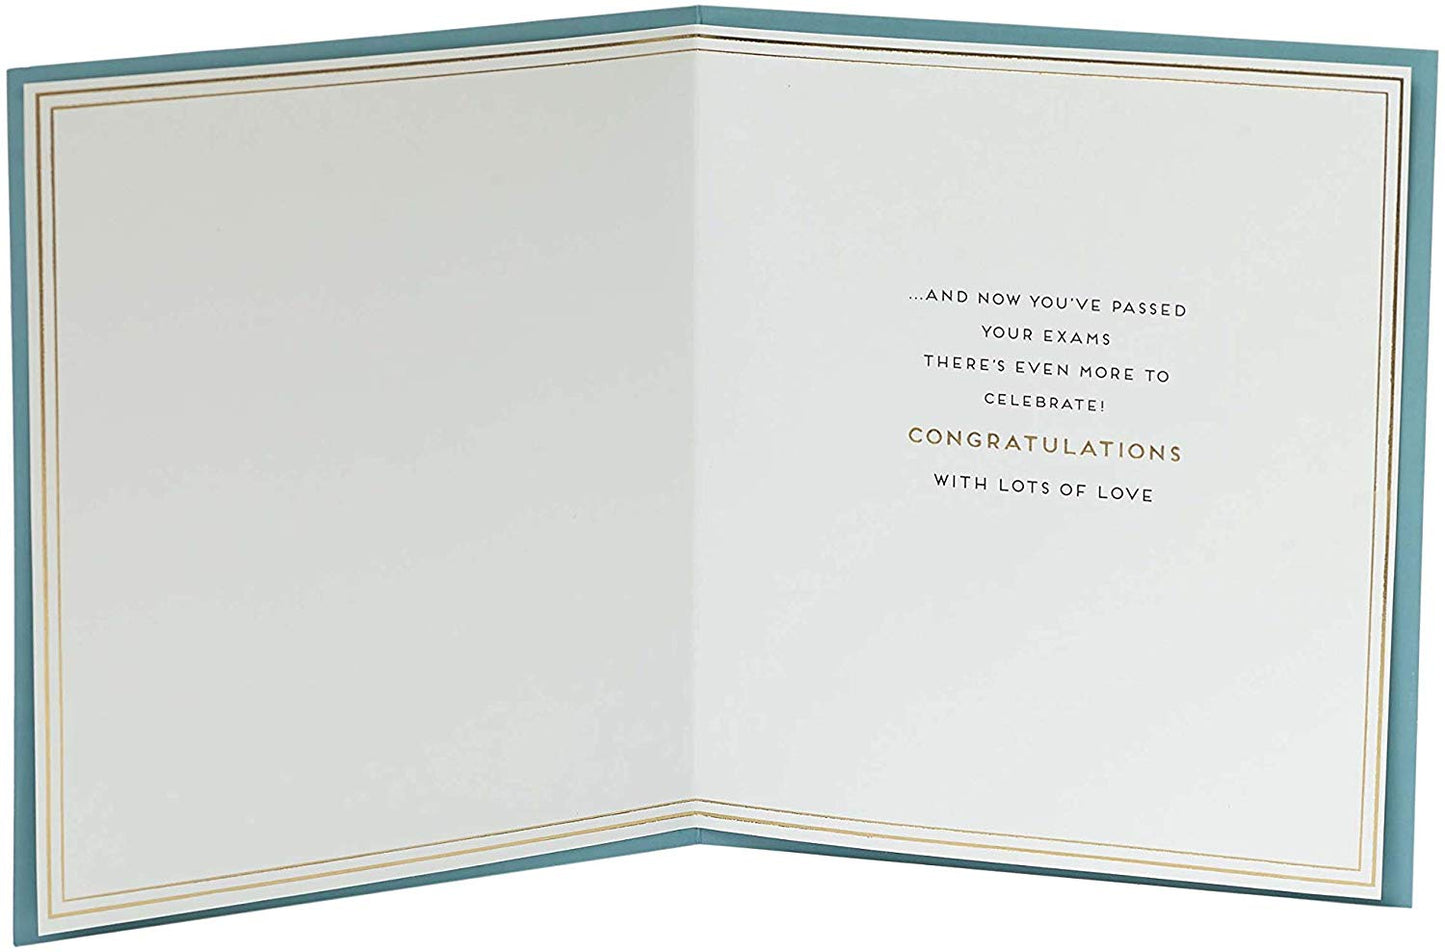 Your Exams Son Congratulations Card On Passing